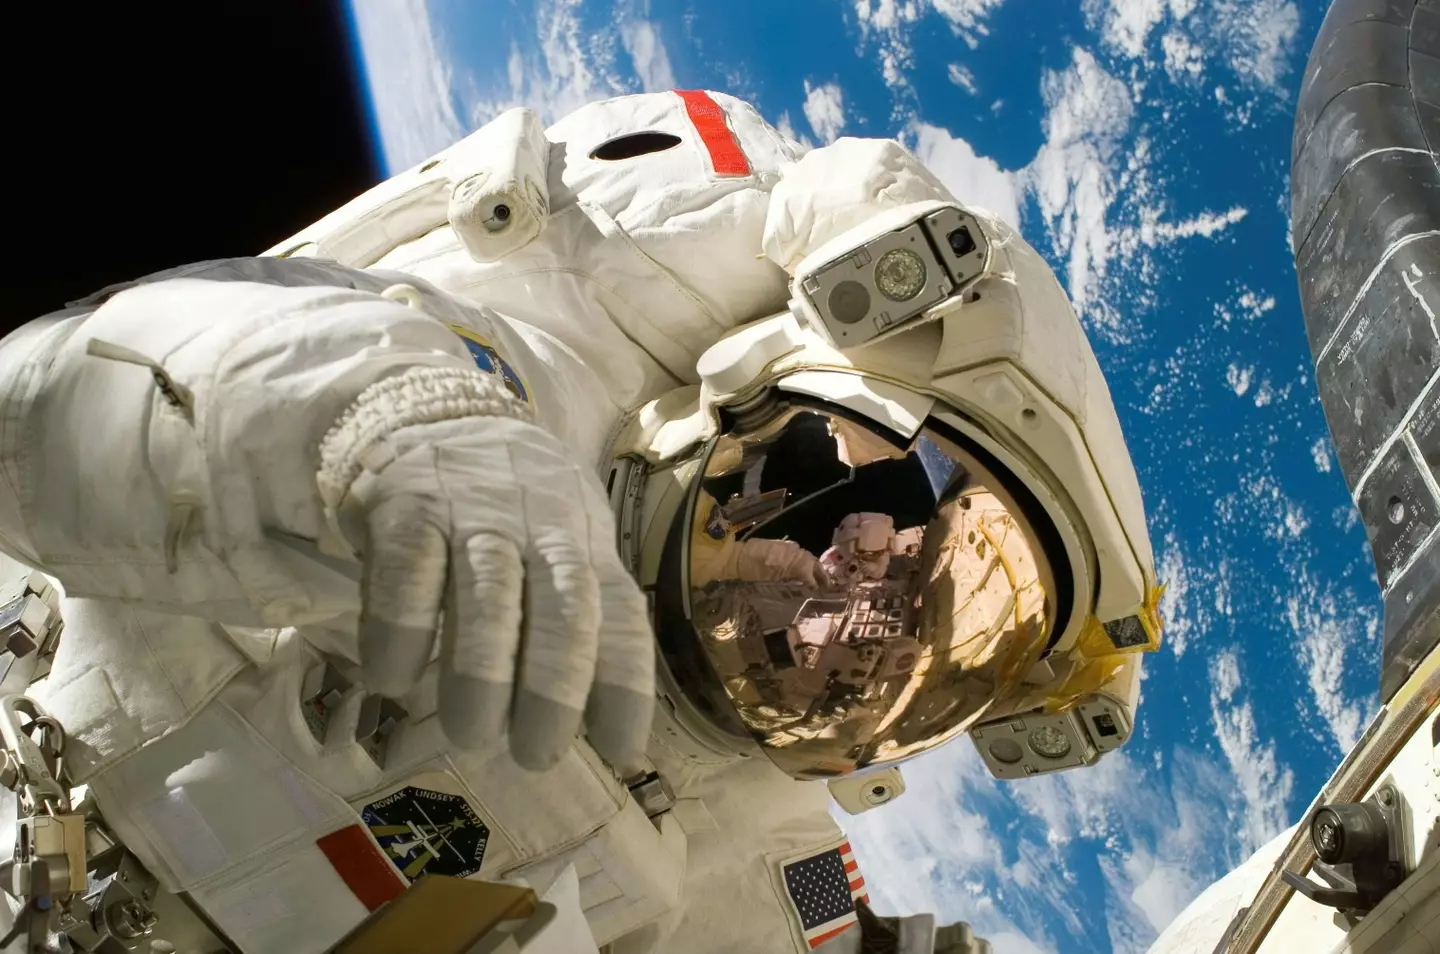 The bacteria could affect astronauts' health. (Pixabay)